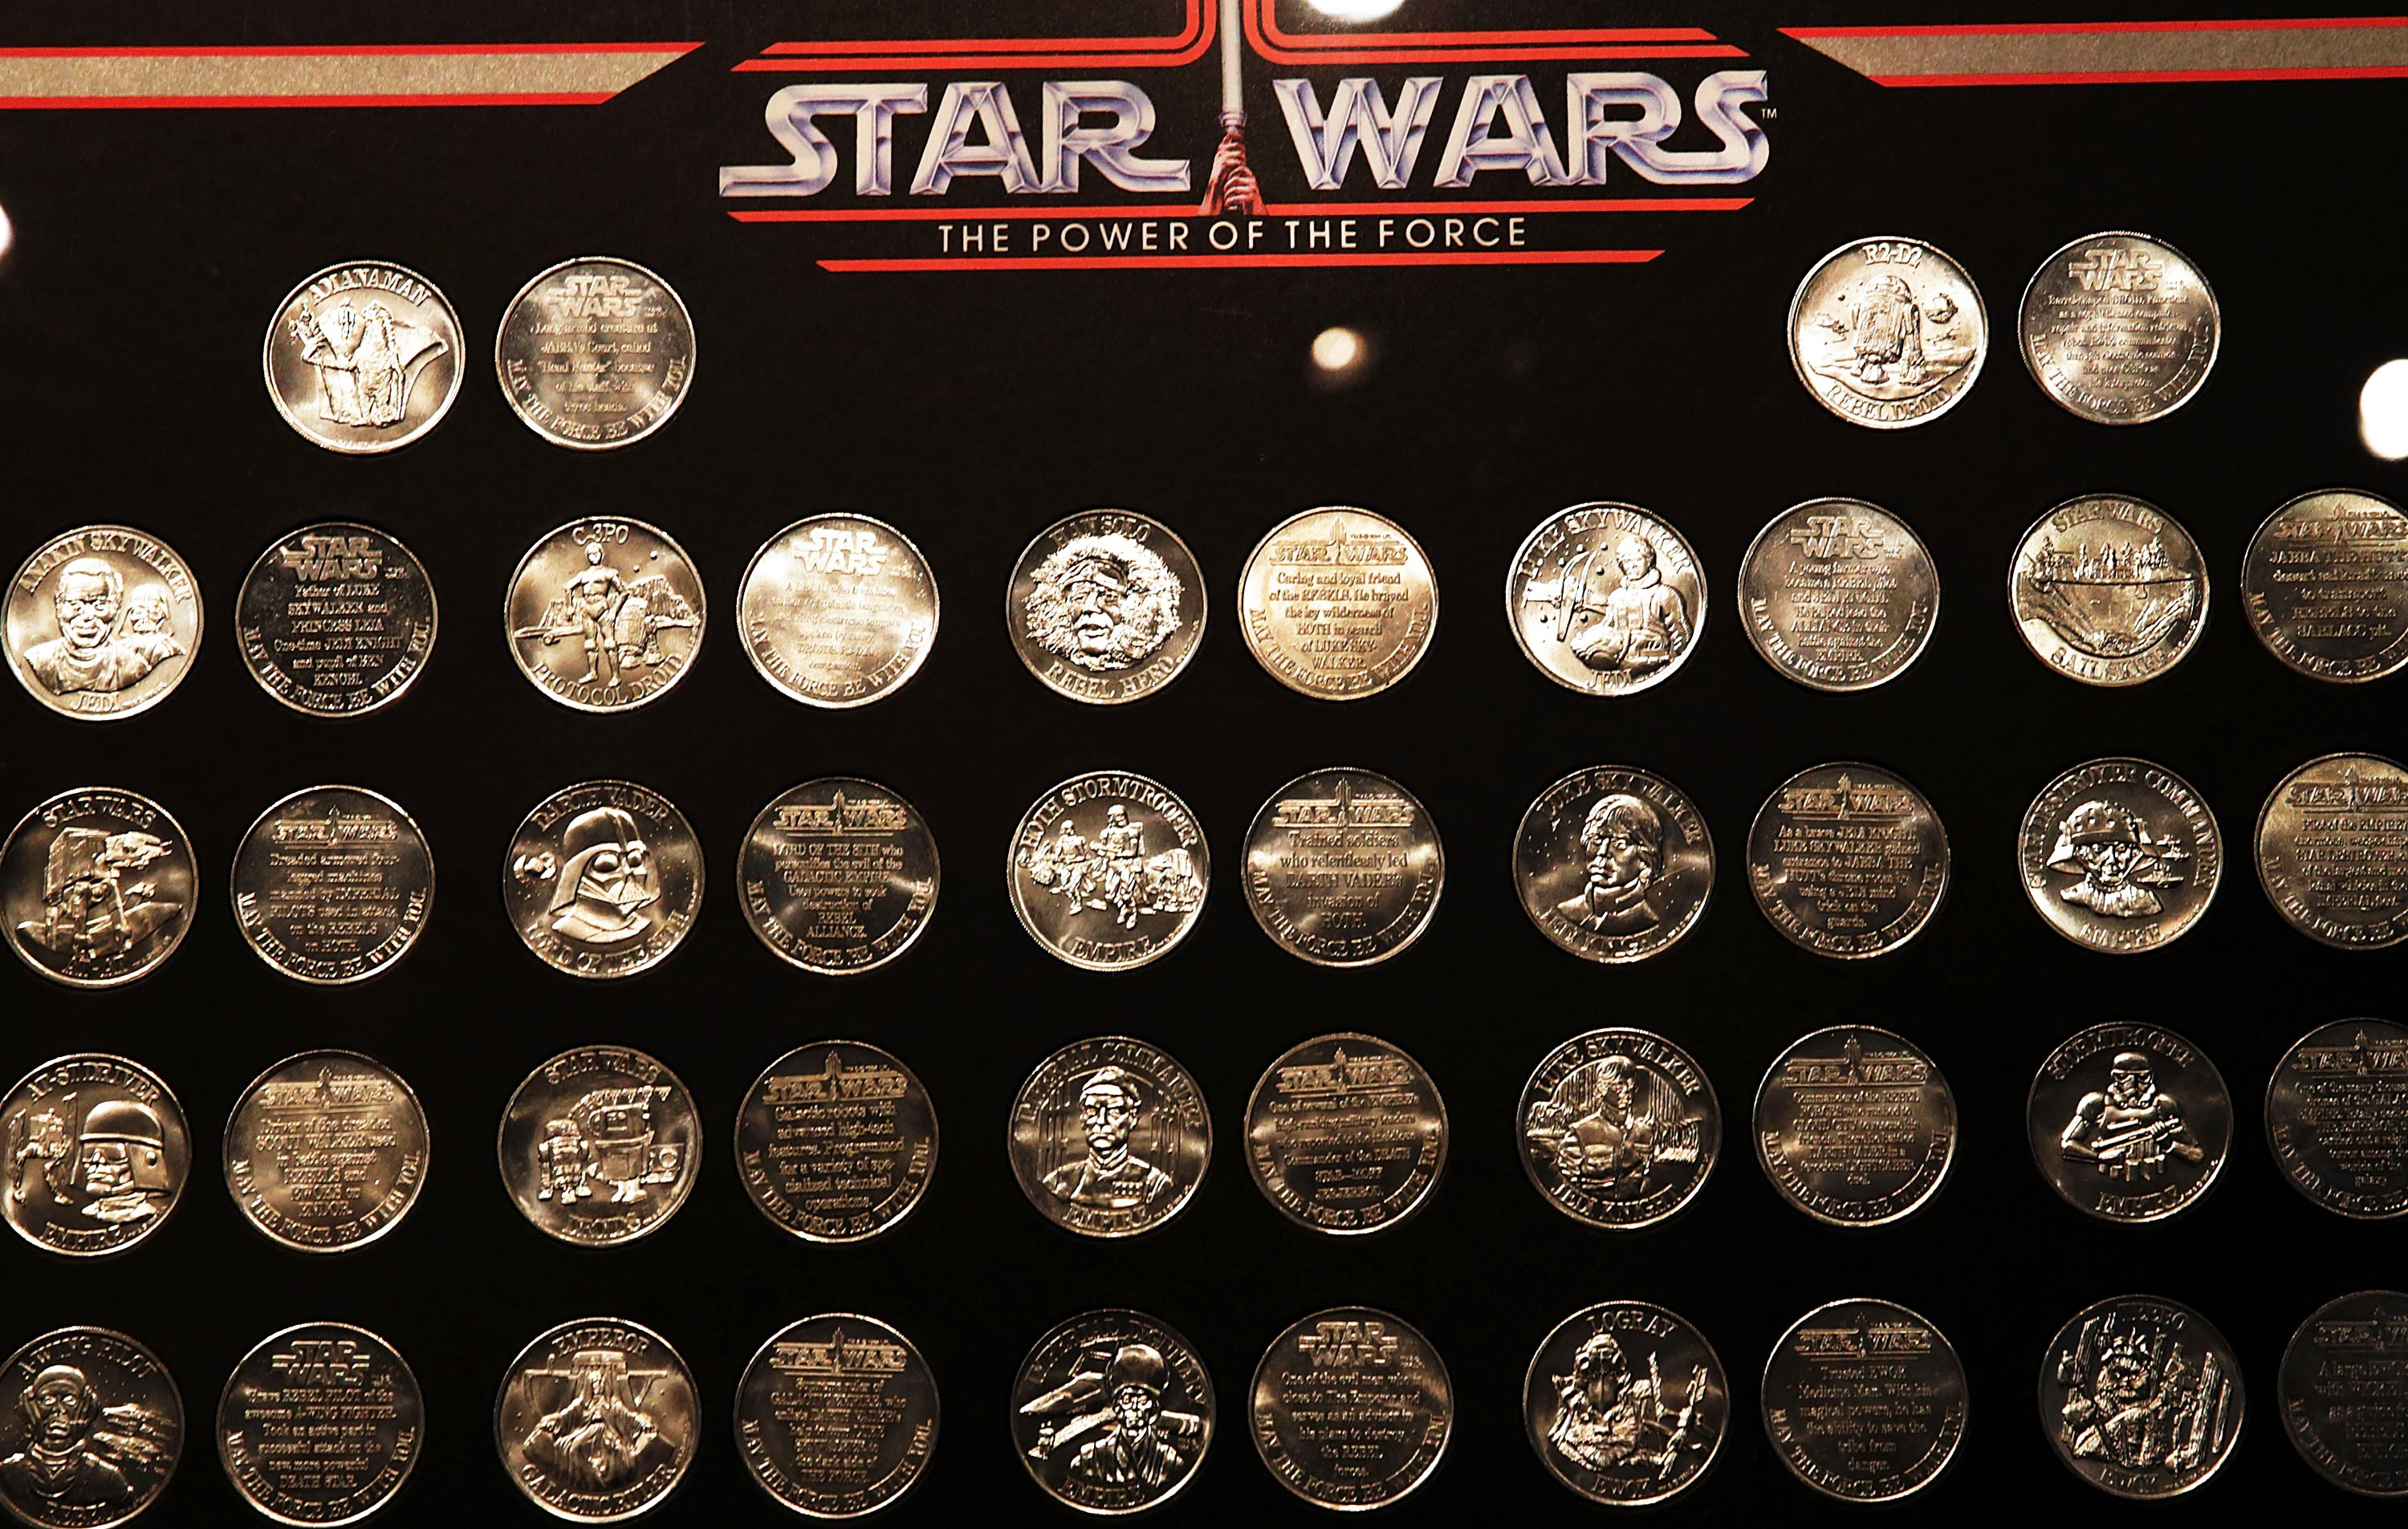 A Power of the Force coin set is displayed at Sotheby's in New York City on Dec. 2, 2015.